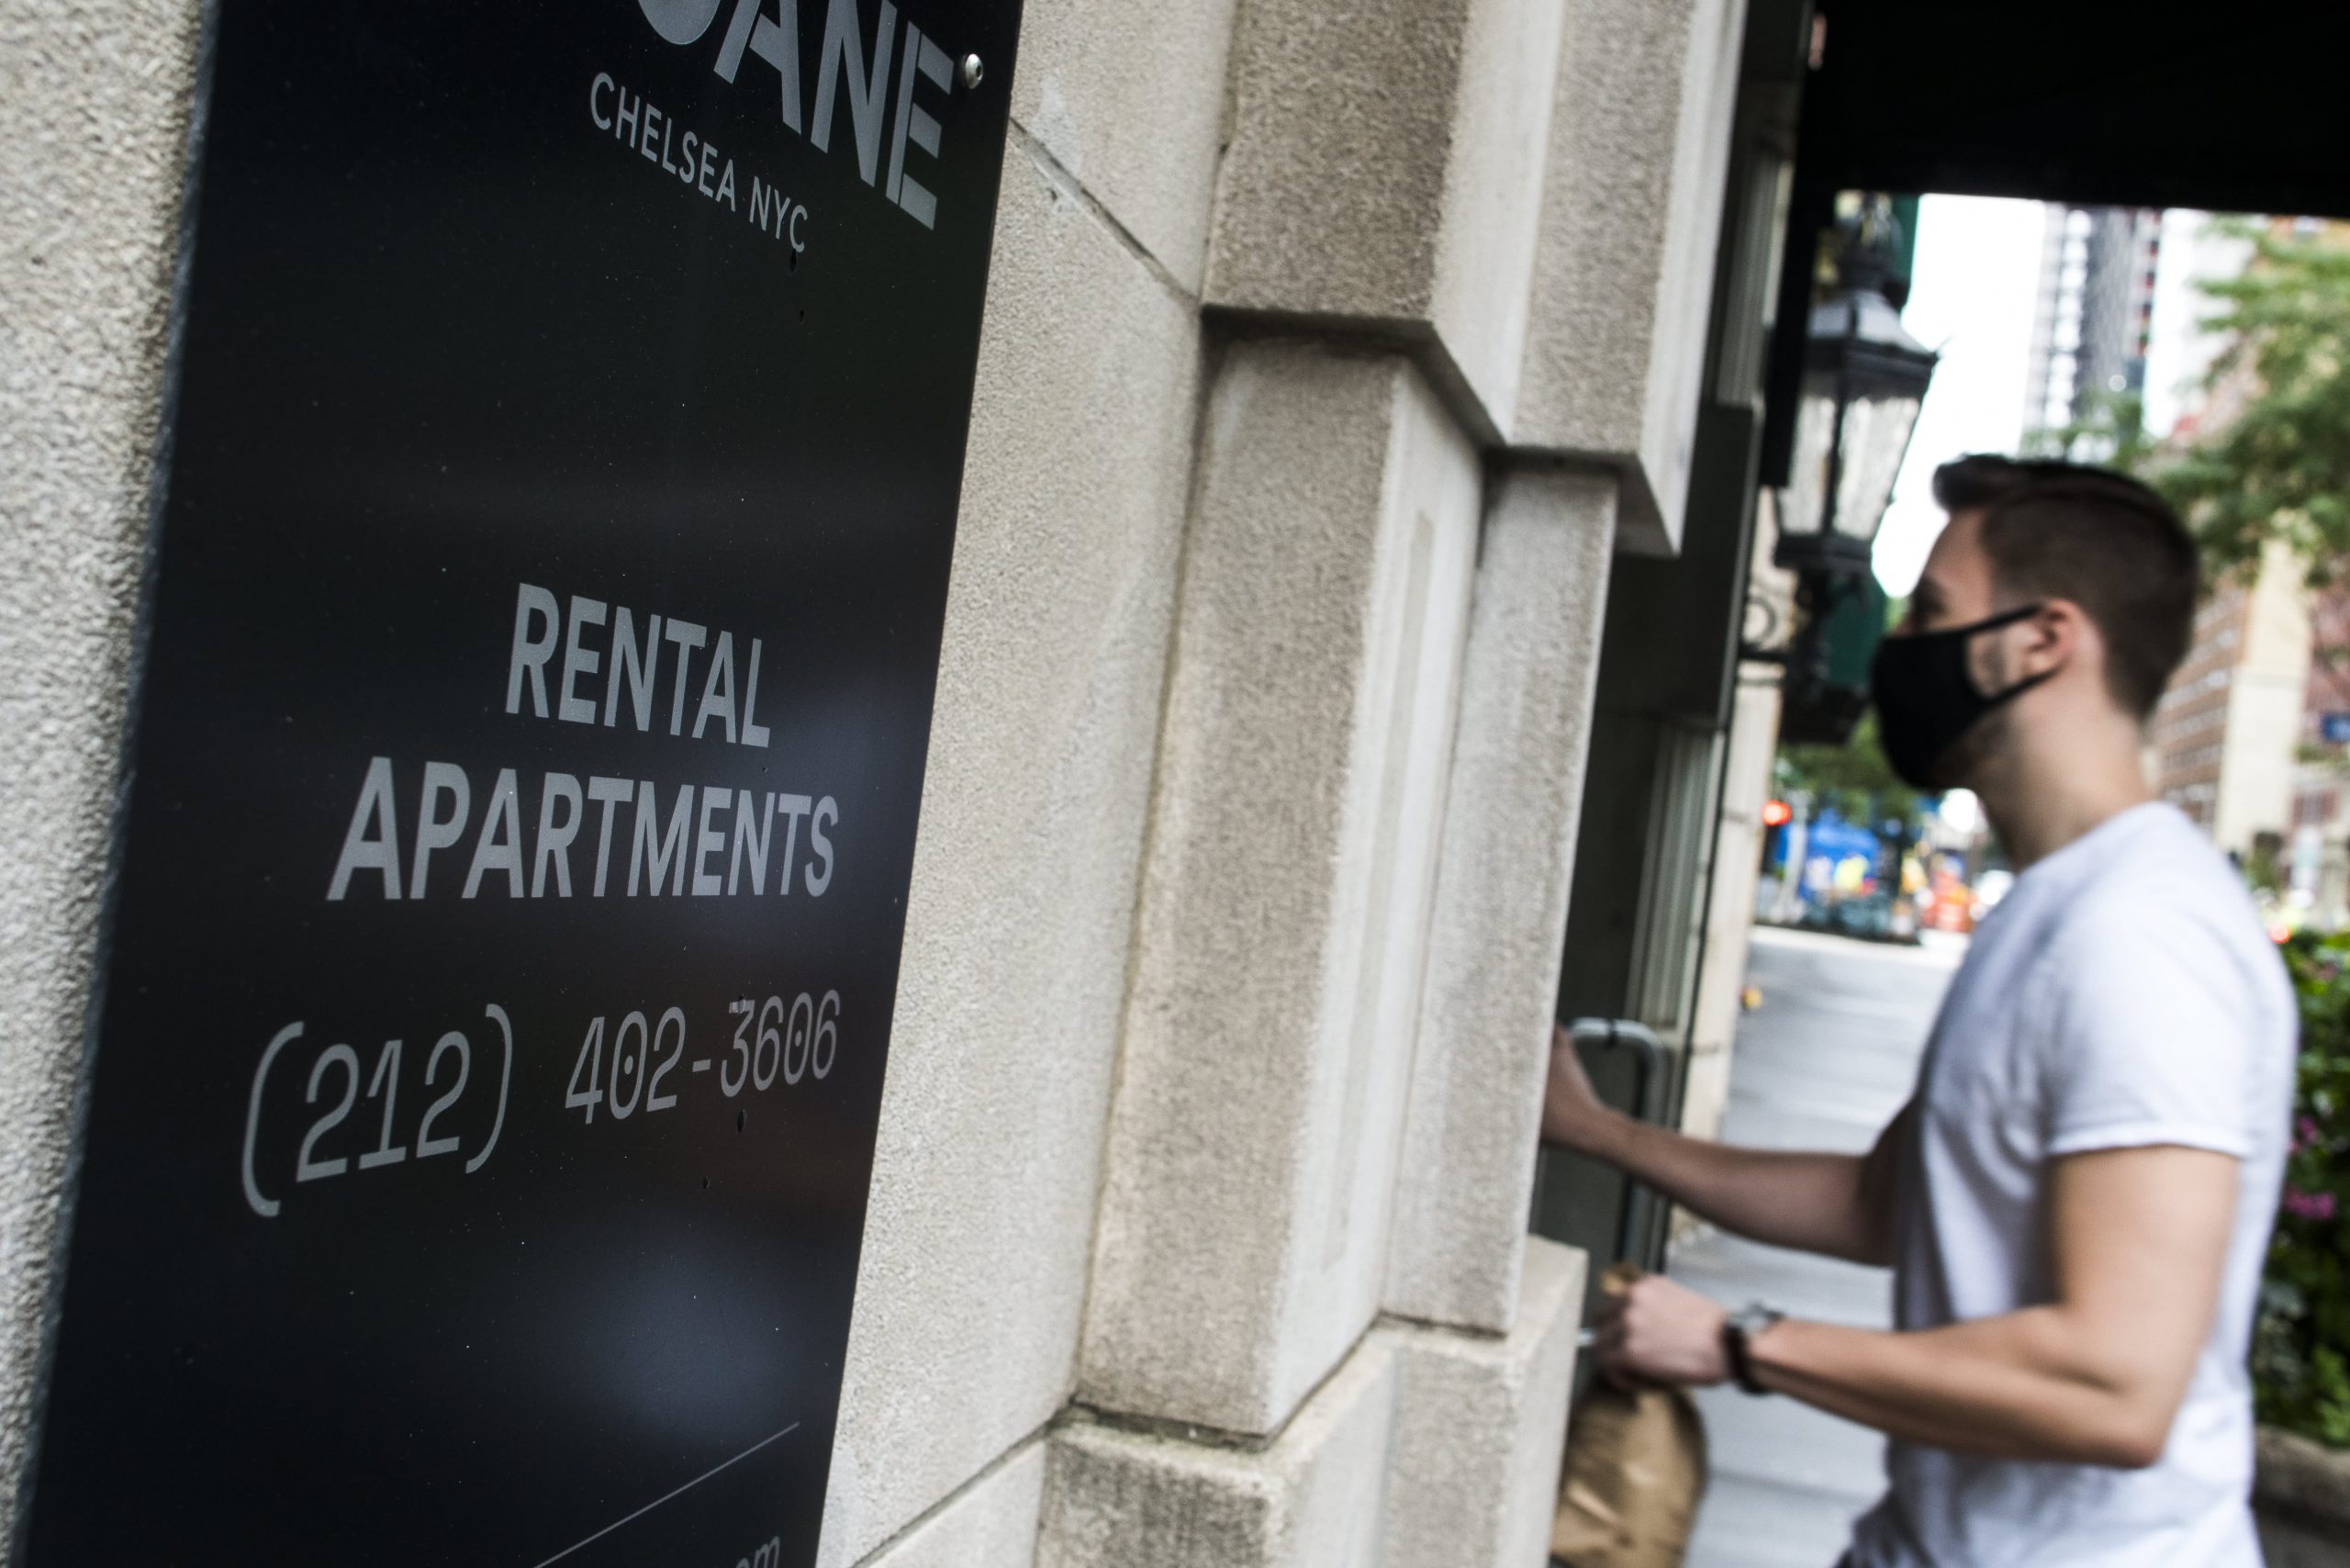 Manhattan residence reductions could also be ending quickly as gross sales soar 73%